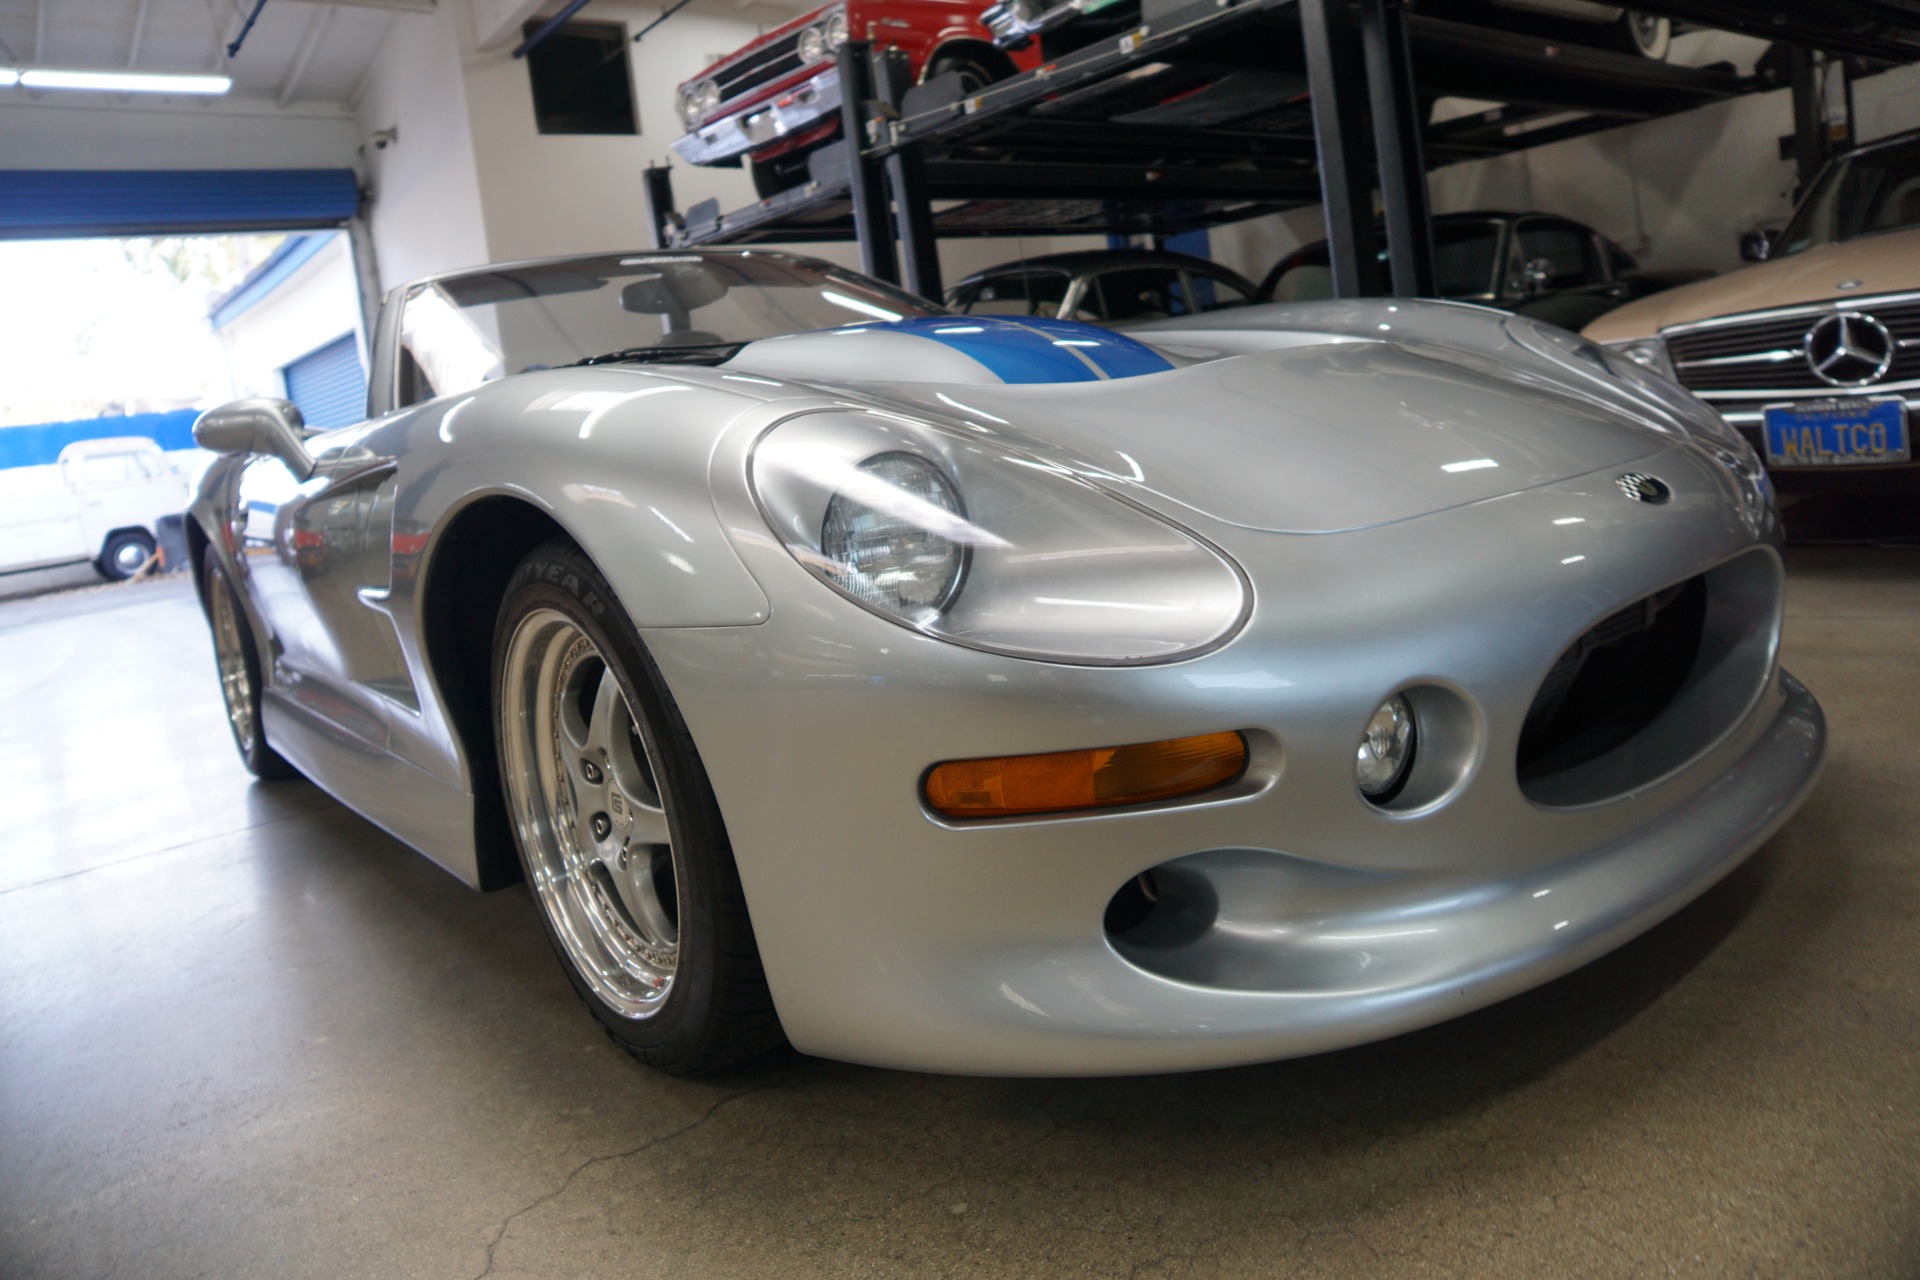 1999 Shelby Series 1 Roadster #100 of 249 built Stock # 0100 for sale ...